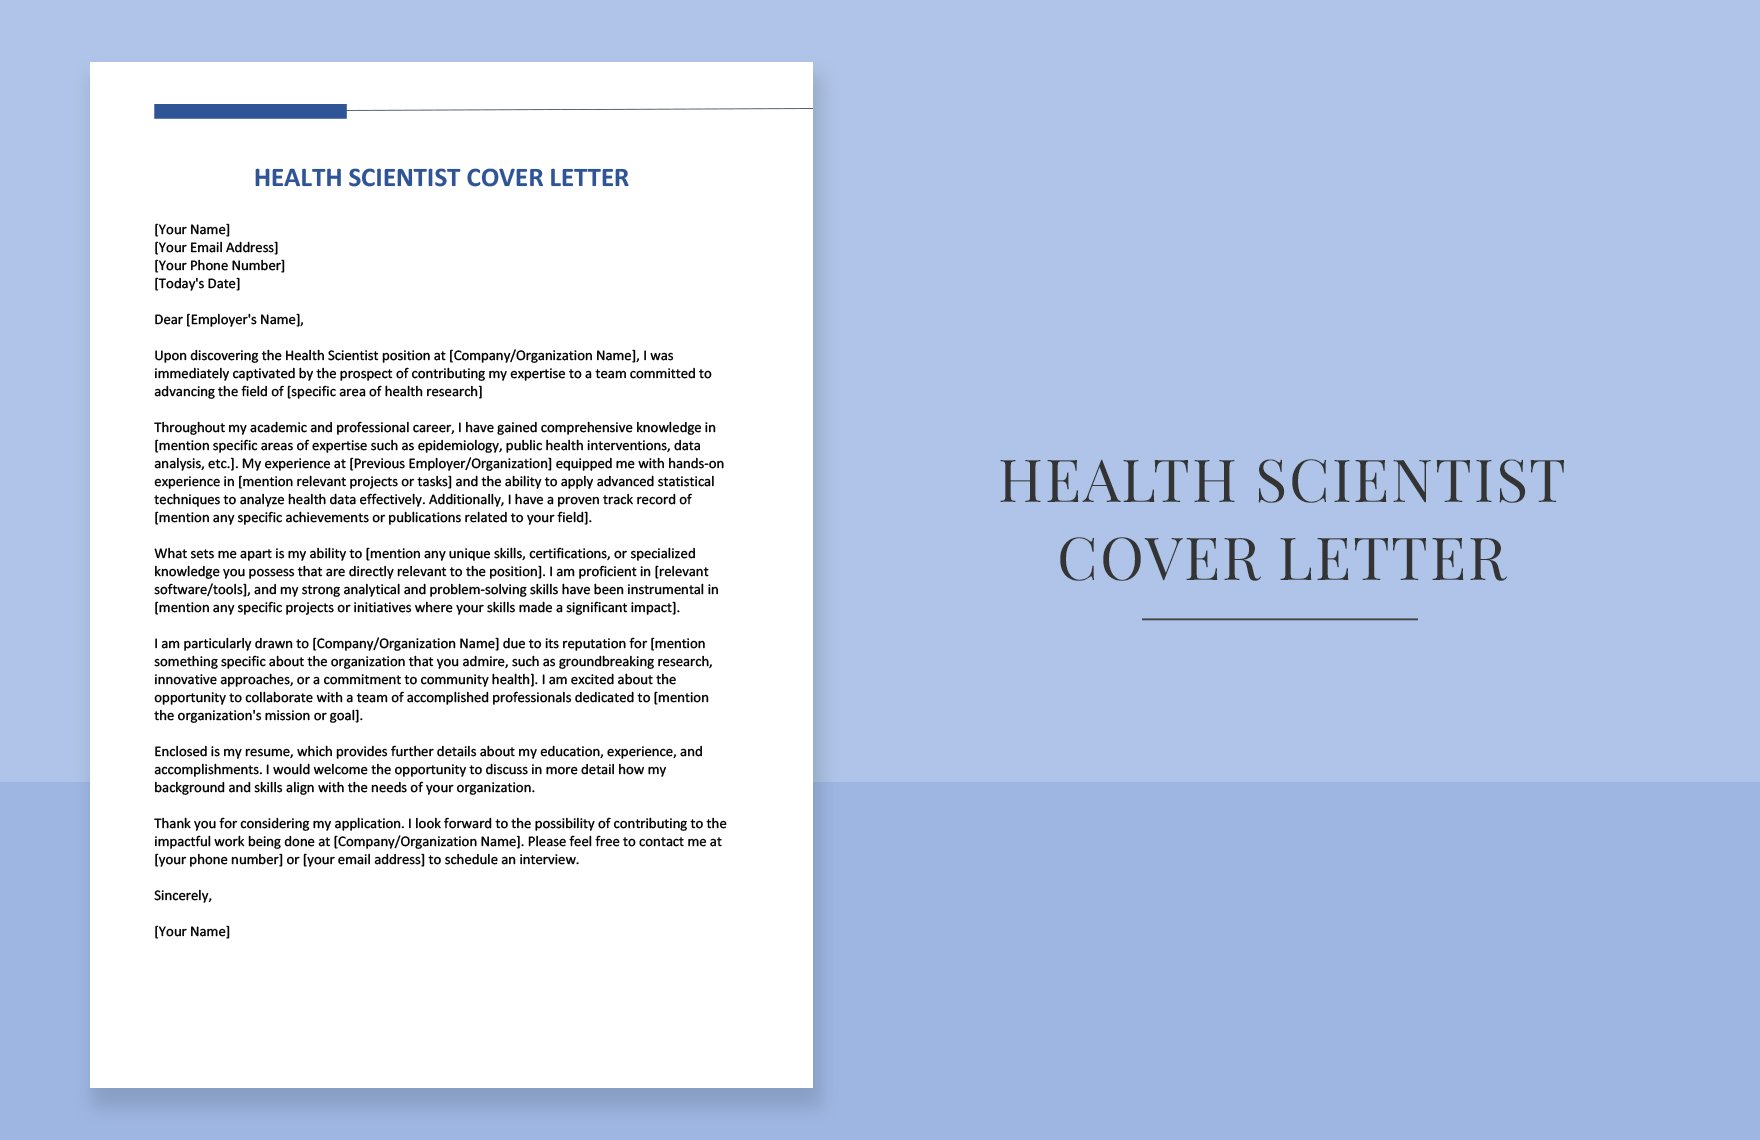 Health Scientist Cover Letter in Word, Google Docs